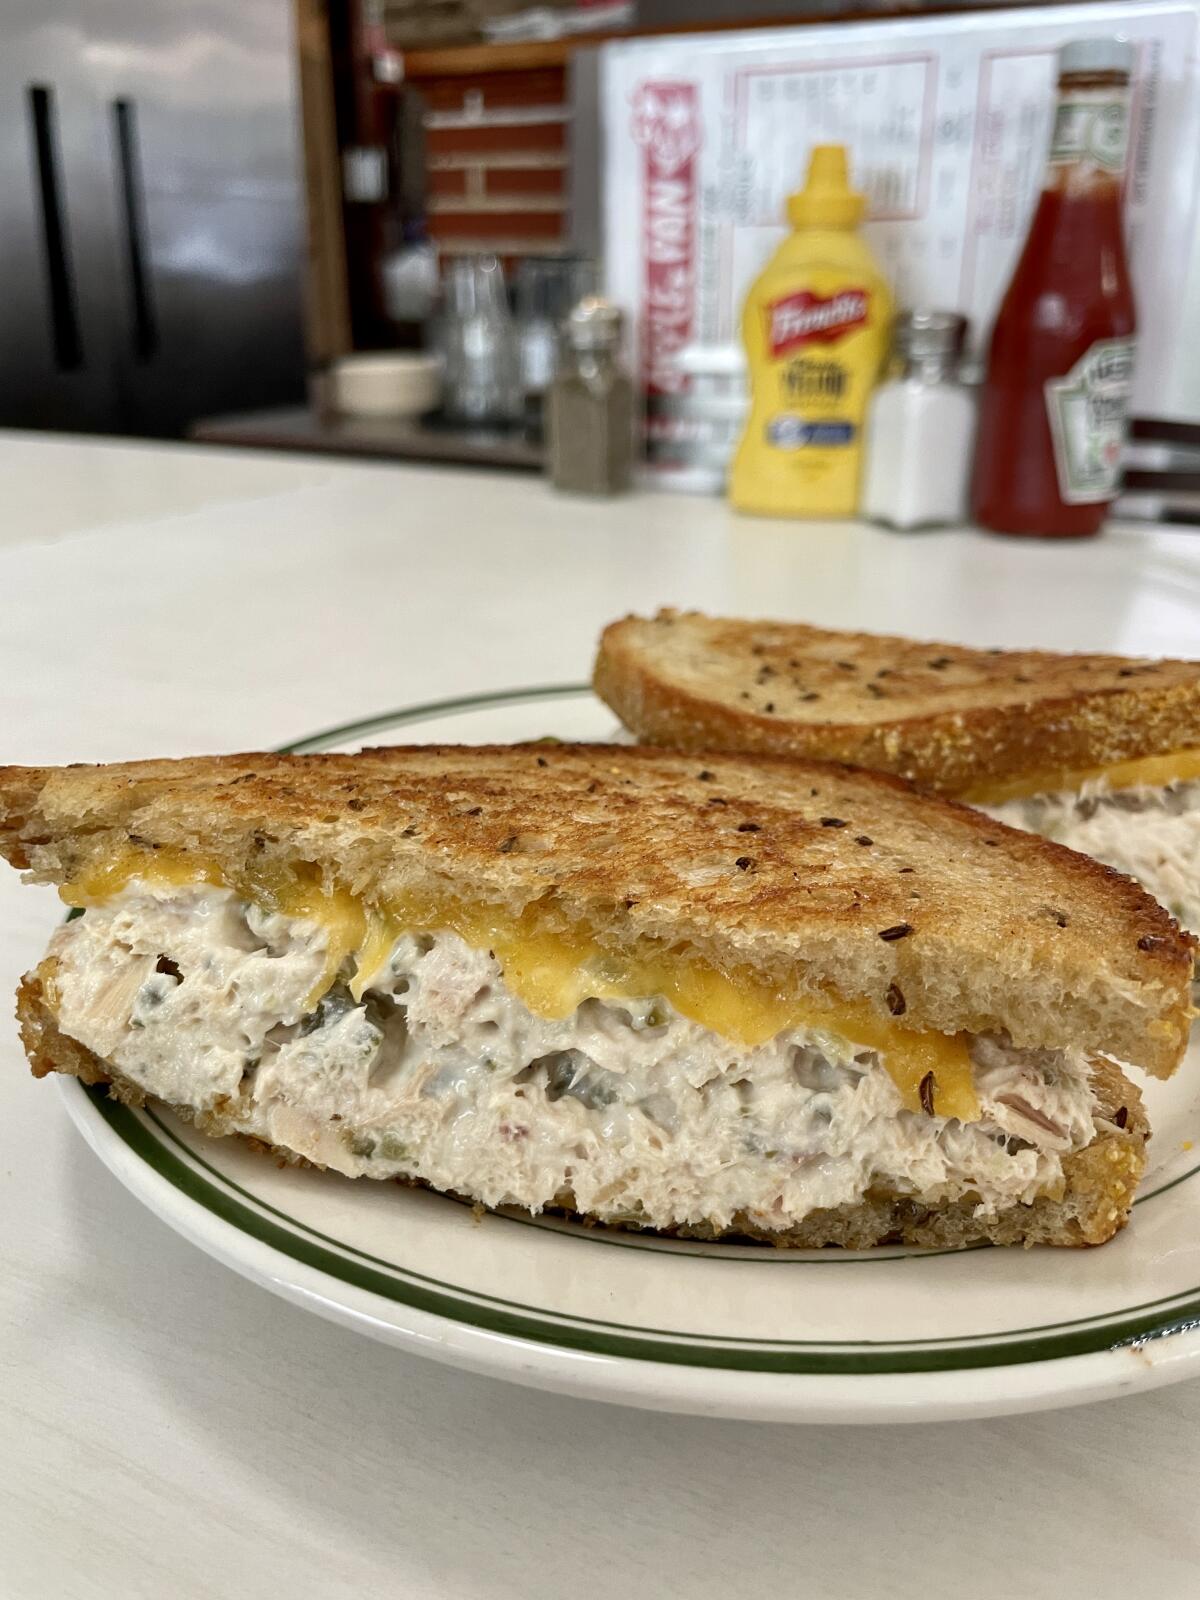 Tuna melt by request at the Apple Pan.